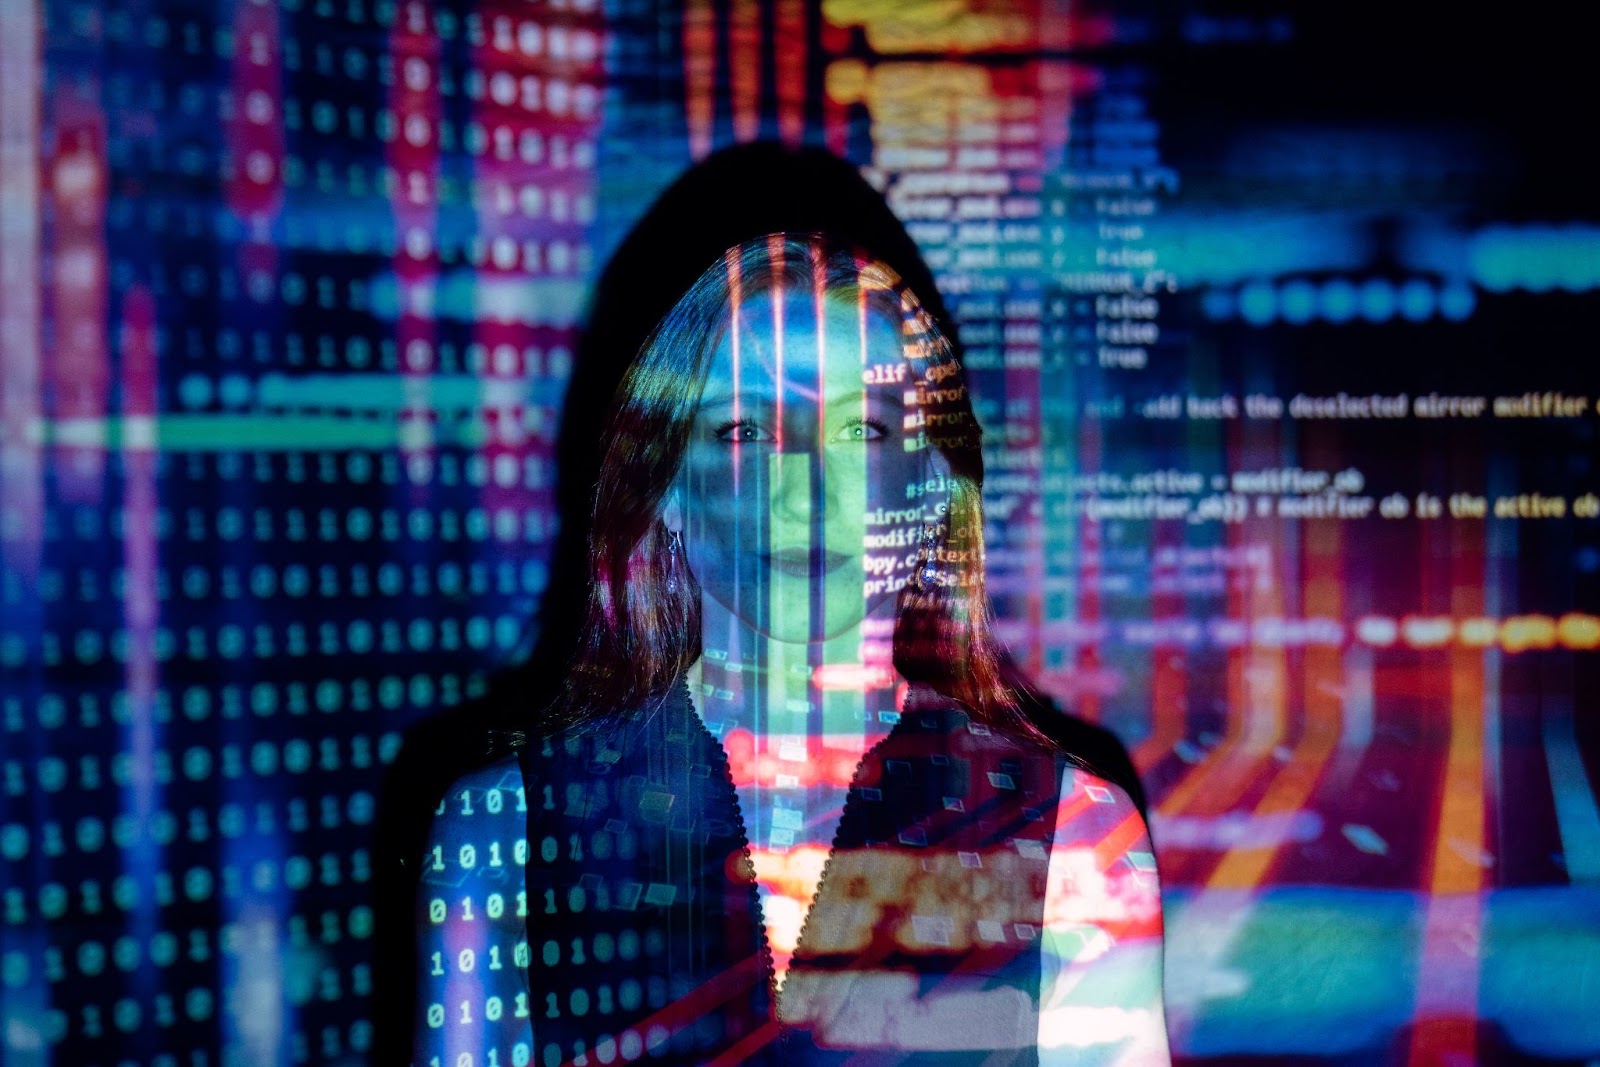 A lady standing in front of multiple codes projected on her face